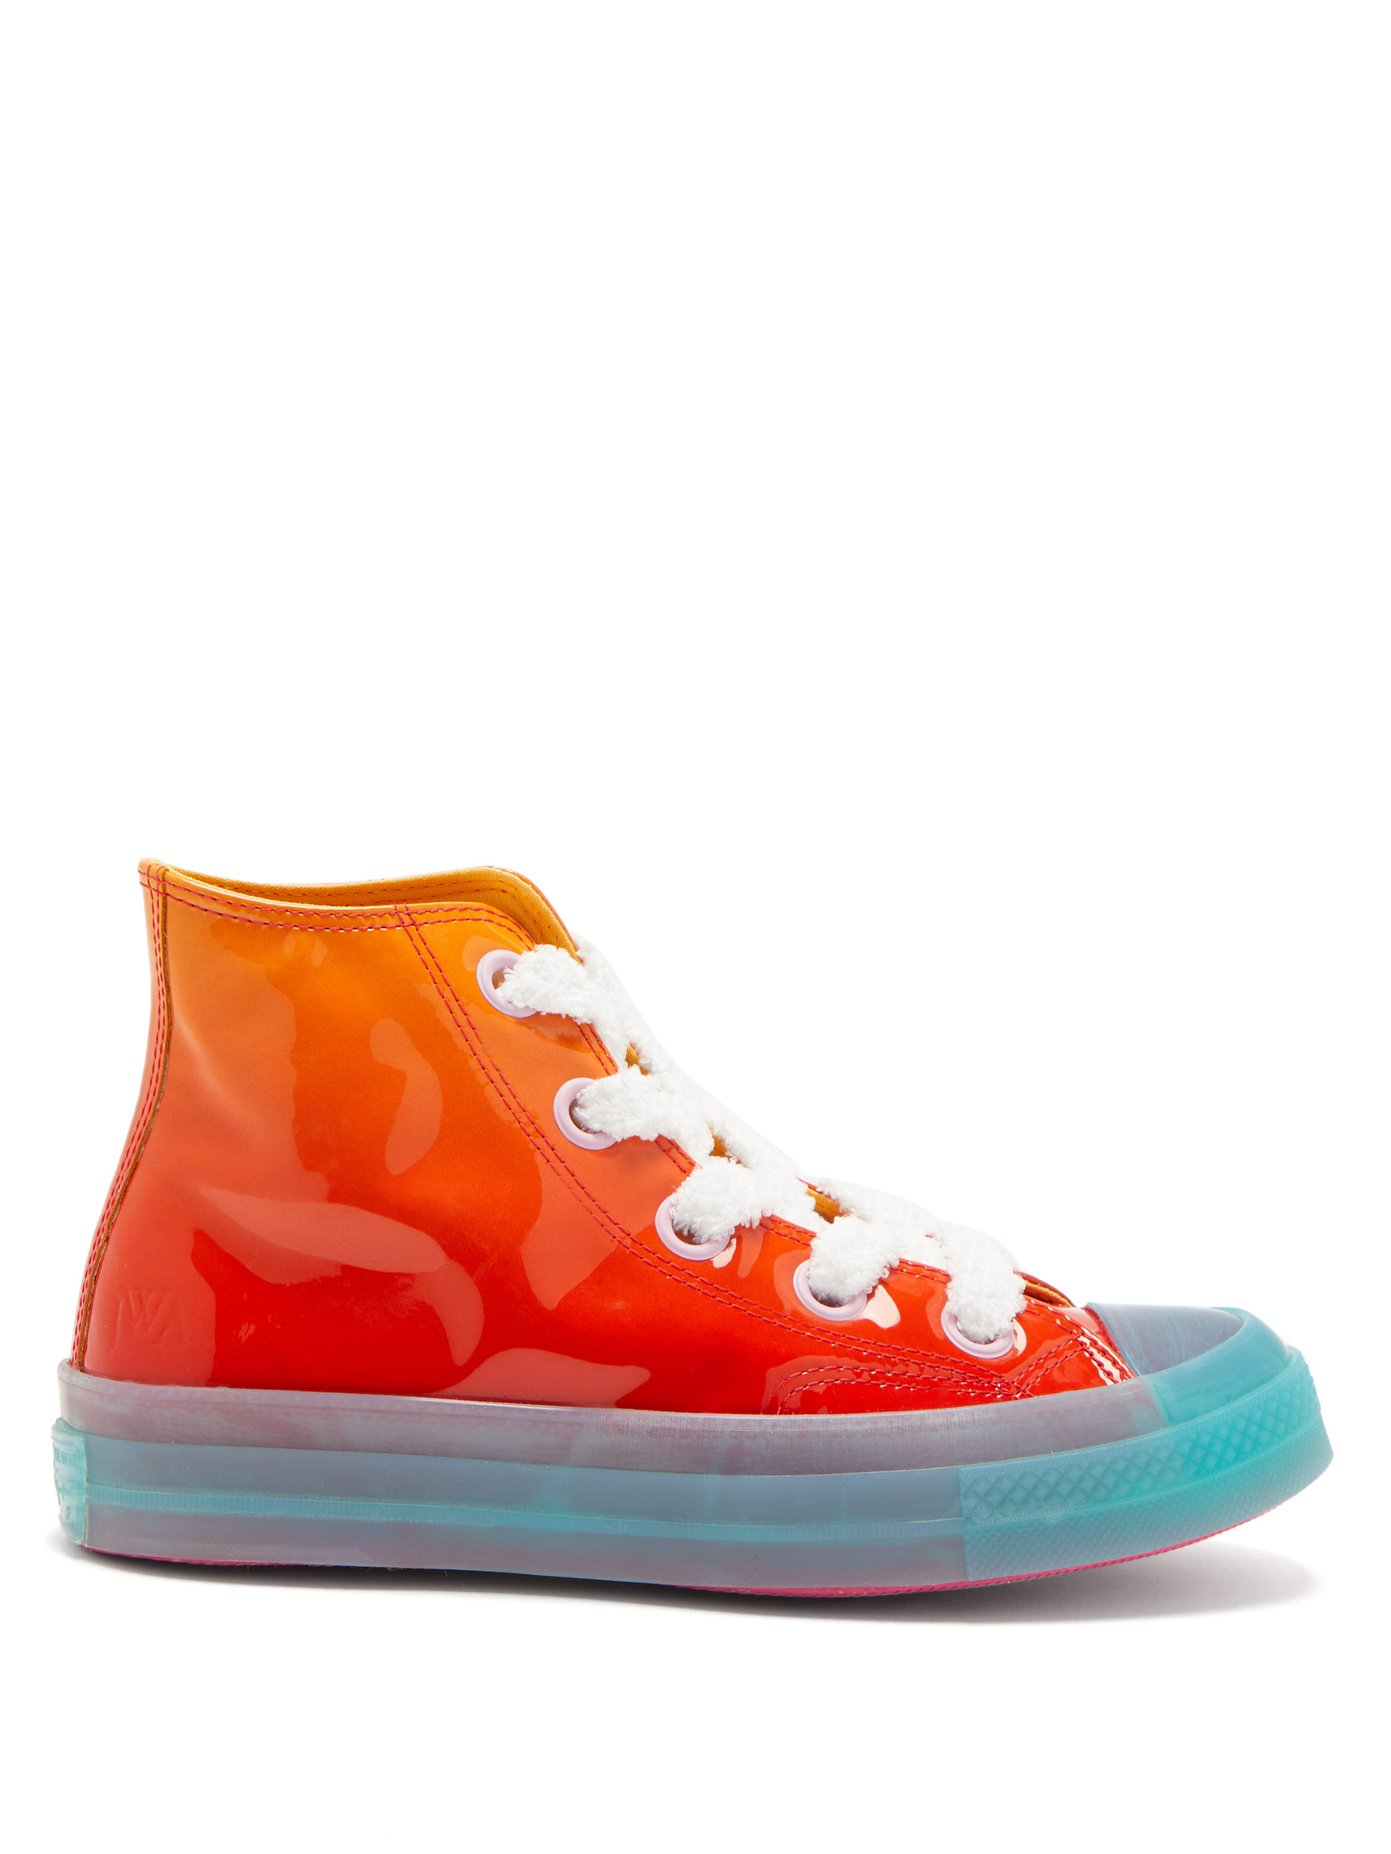 red patent leather converse